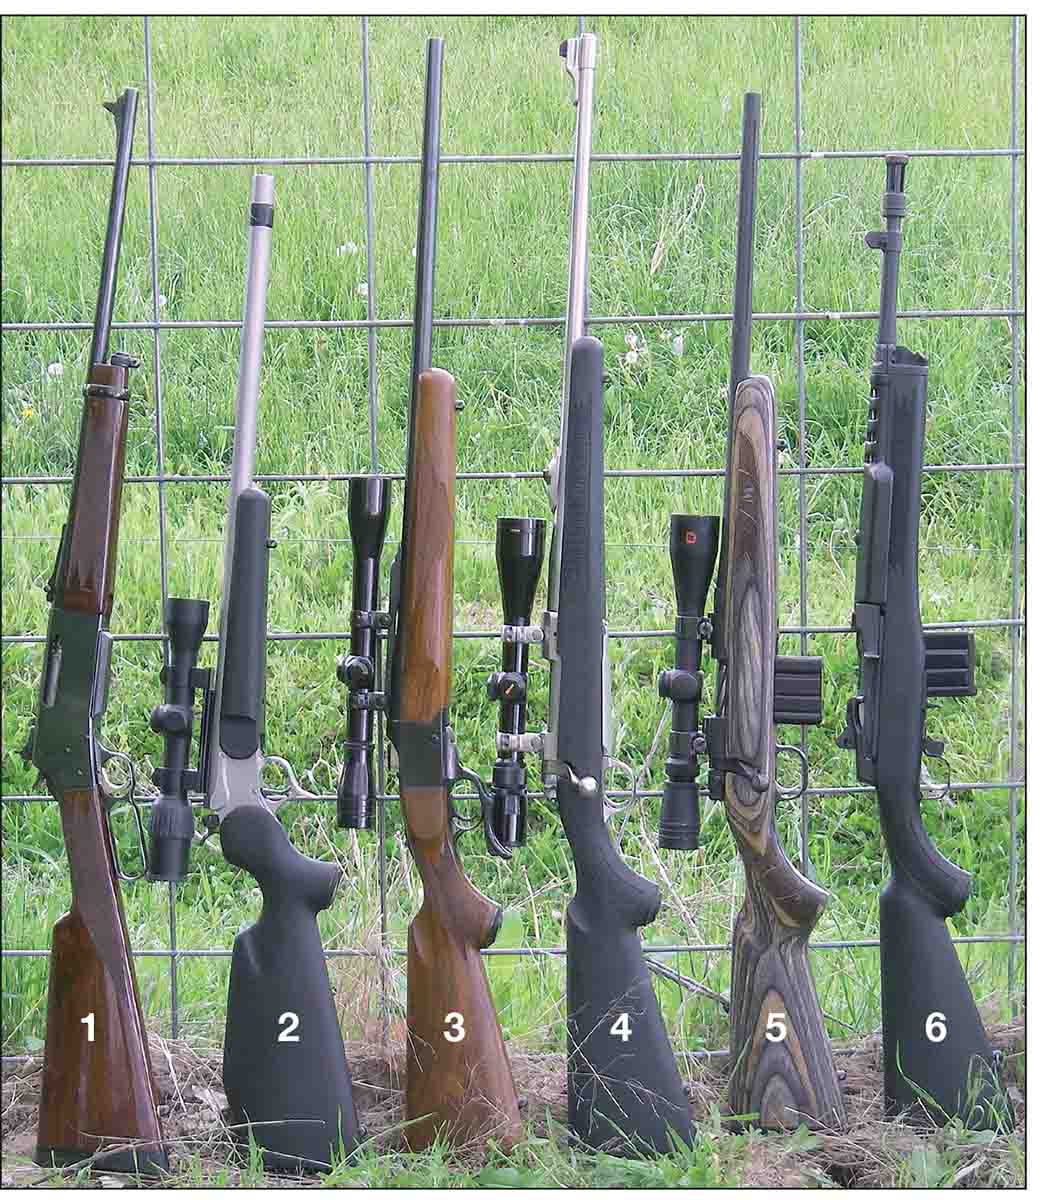 The .223 Remington has been chambered in a variety of rifles and action types. A few examples include the (1) Browning BLR 81, (2) Thompson/Center G2 Contender, (3) Ruger No. 1, (4) Ruger M77 MKII All-Weather, (5) Mossberg MVP and (5) Ruger Mini-14 Ranch Rifle.